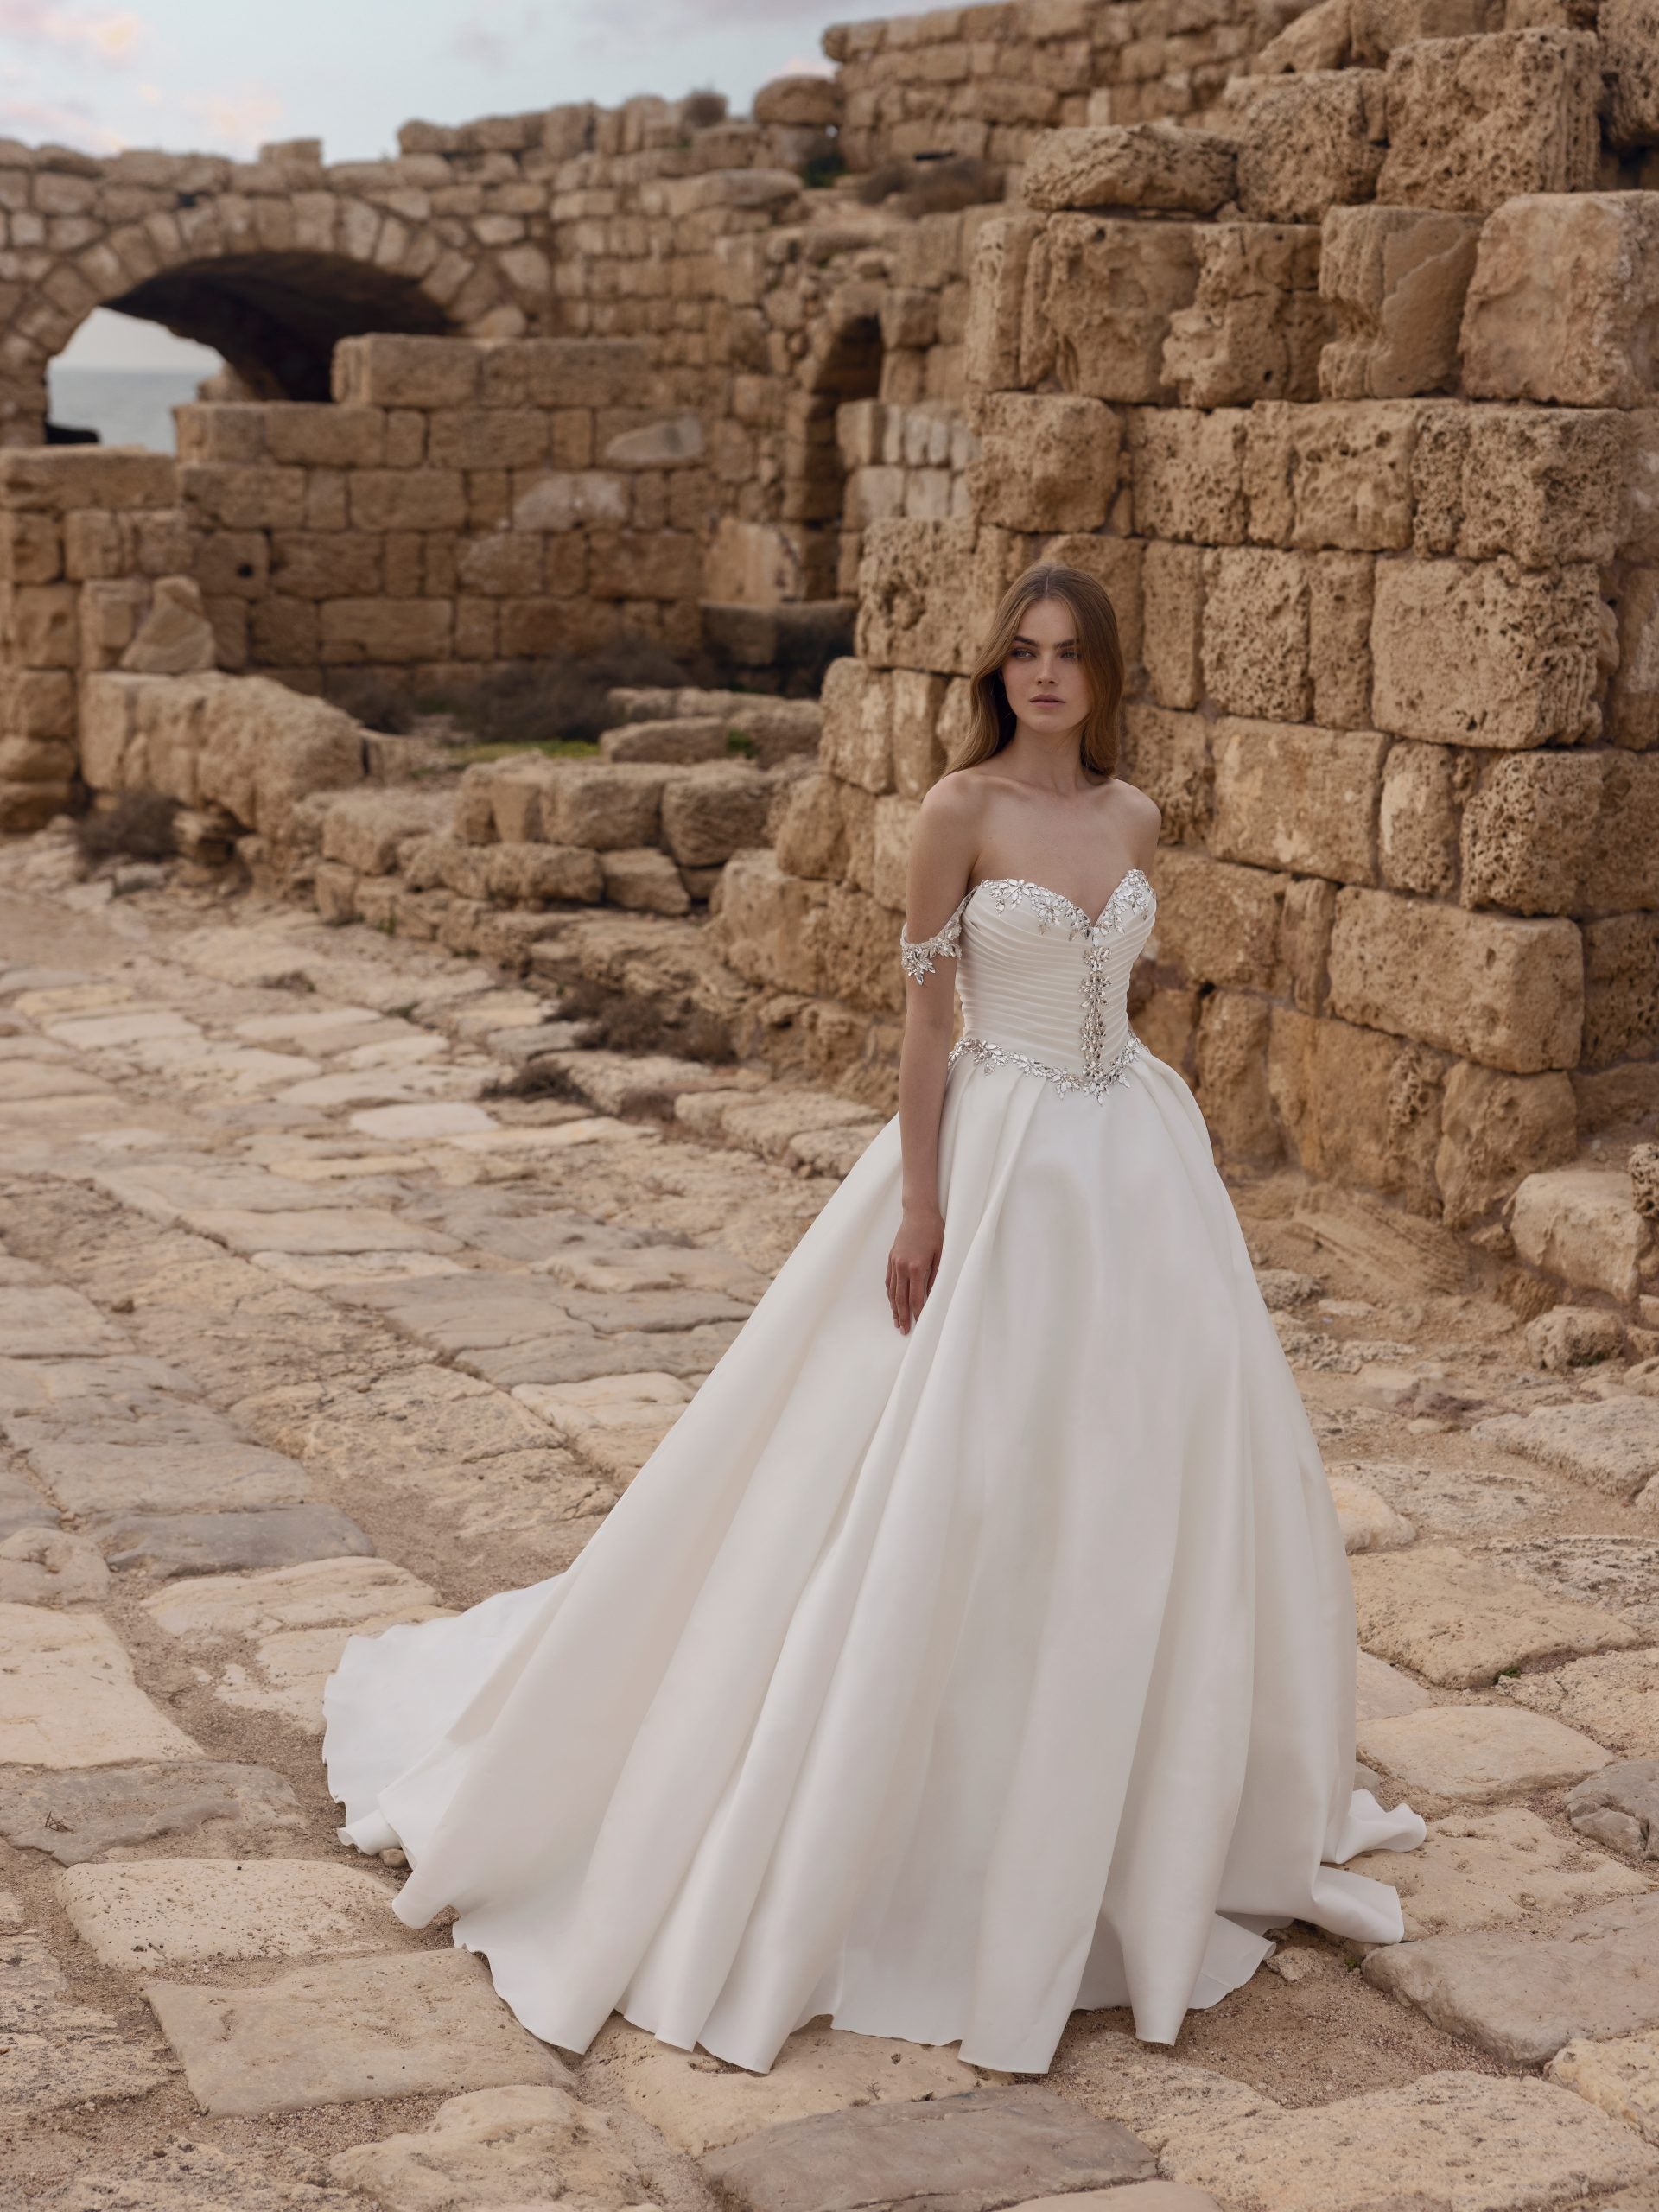 Strapless Ball Gown Wedding Dress With Beaded Bodice by Pnina Tornai